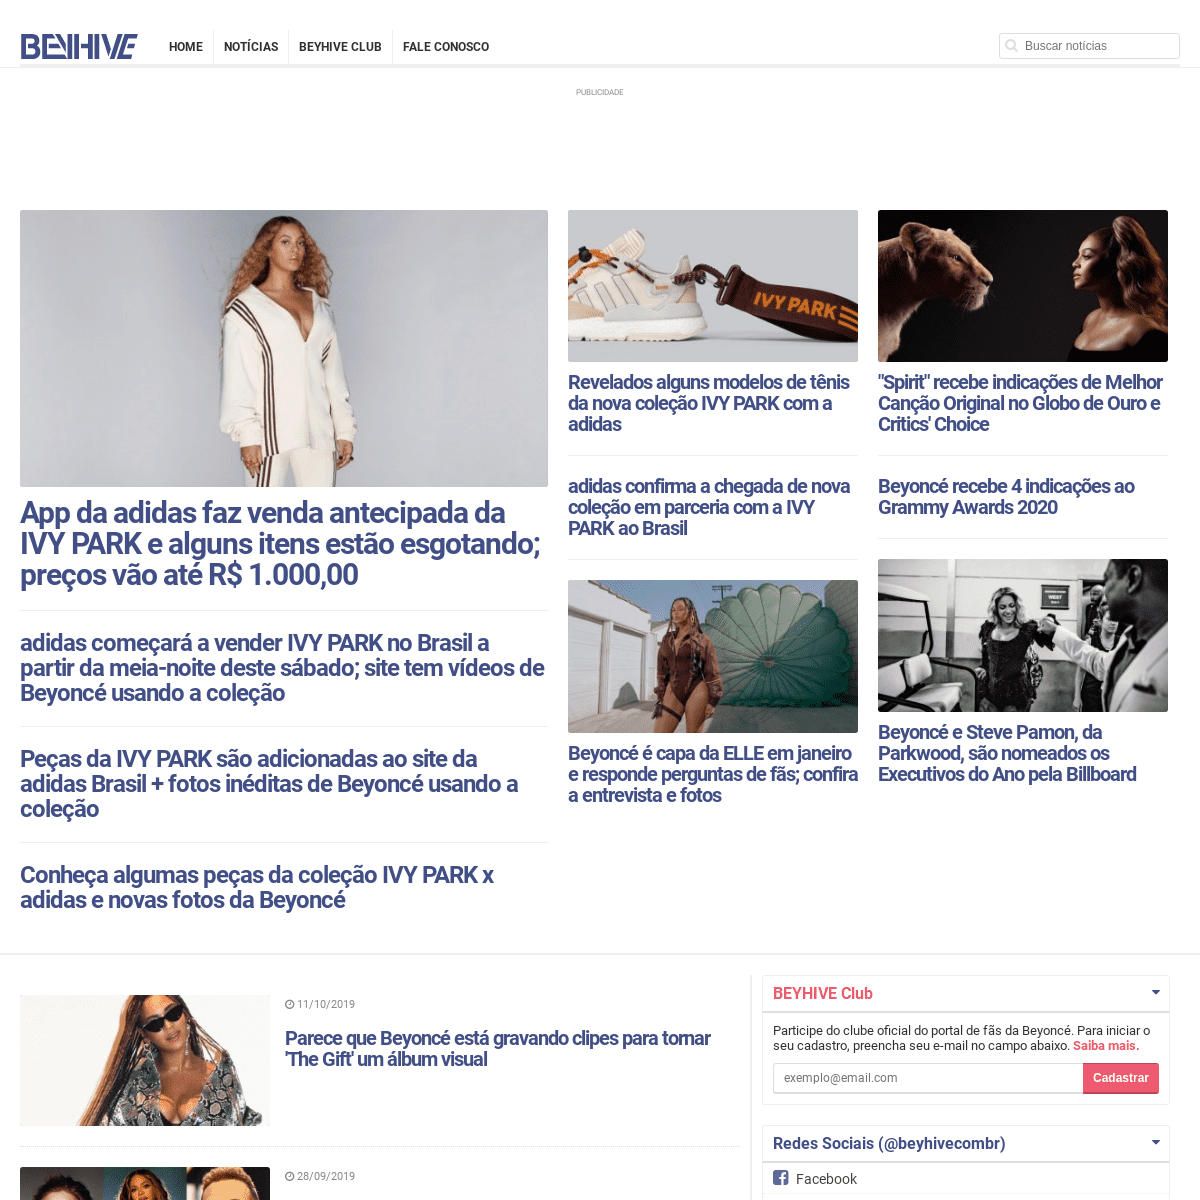 A complete backup of beyhive.com.br